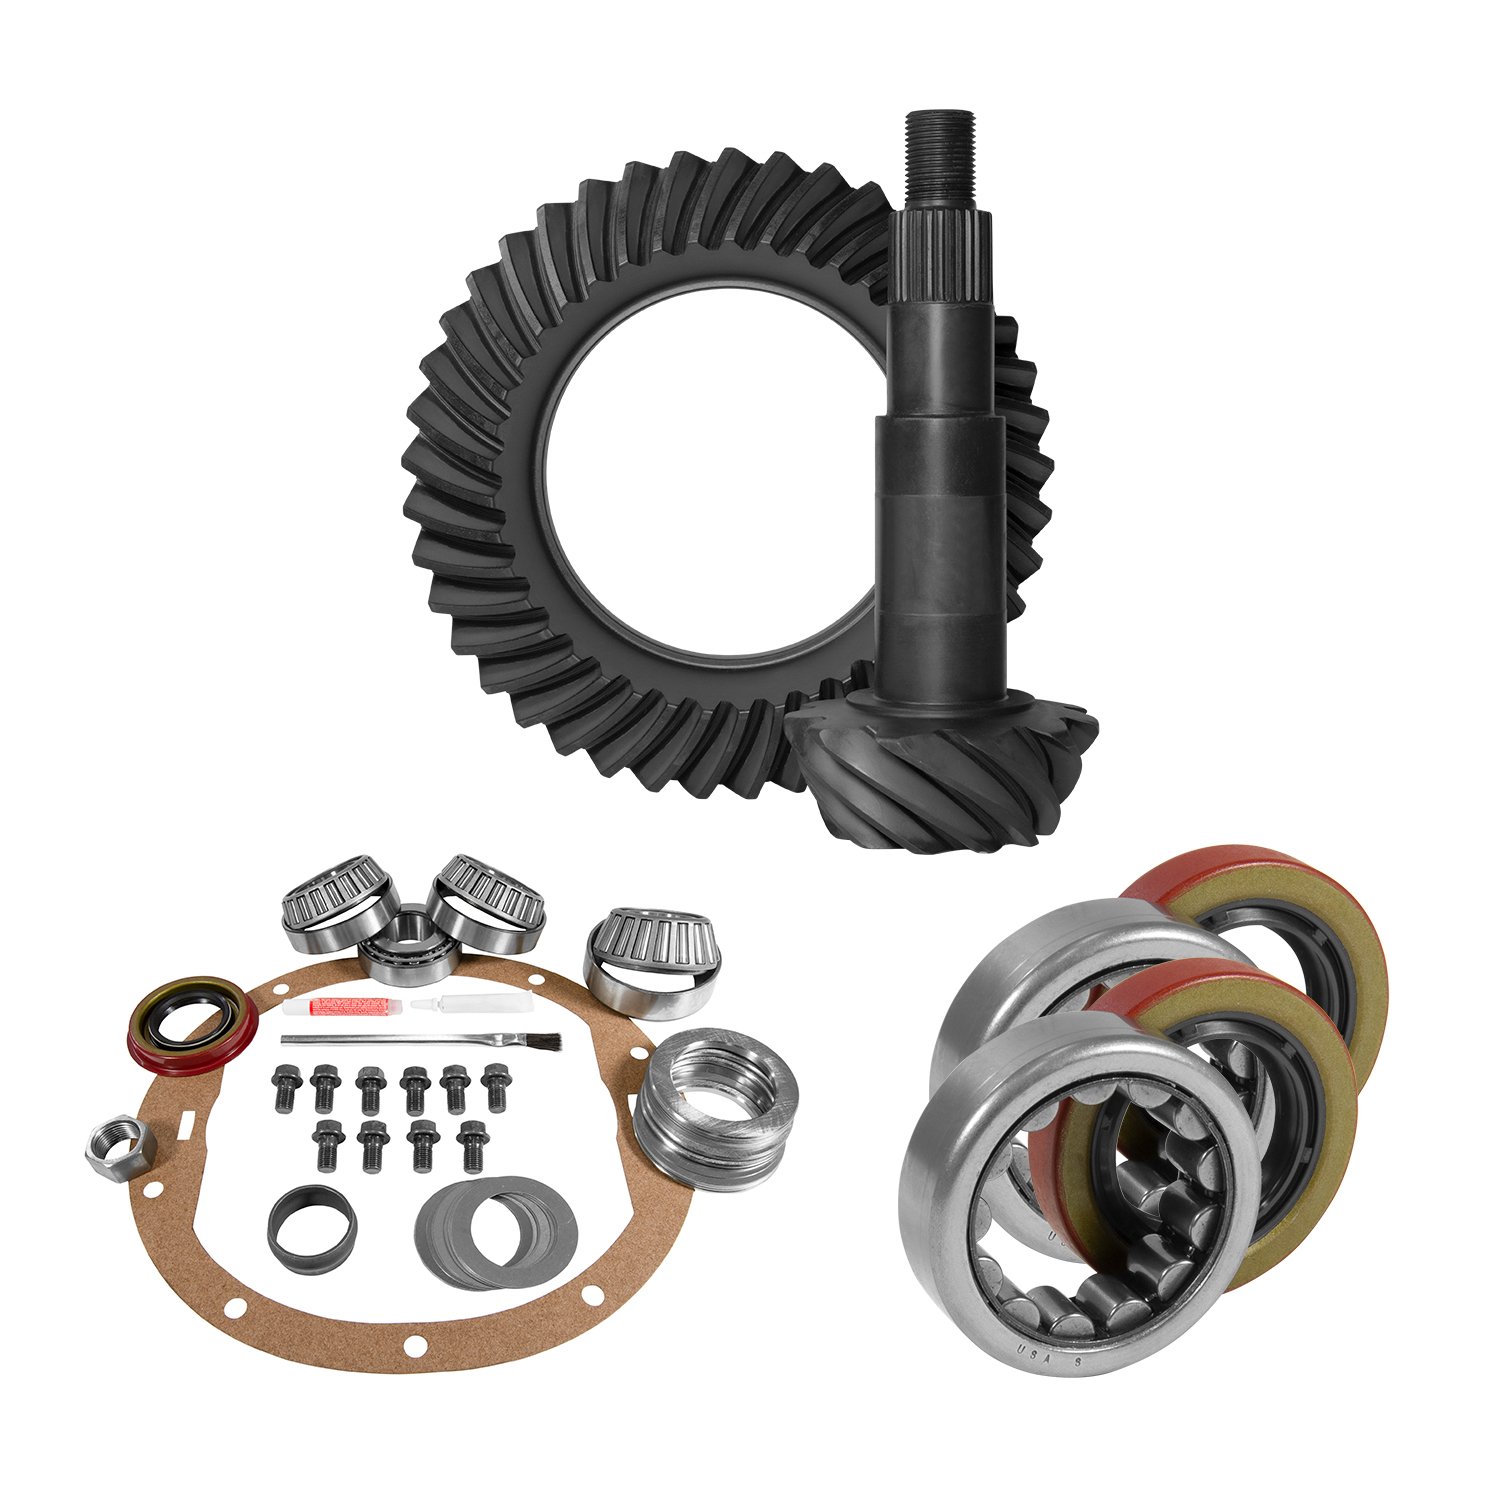 USA Standard 10664 8.2 in. GM 3.08 Rear Ring & Pinion Install Kit, 2.25 in. Od Axle Bearings & Seals